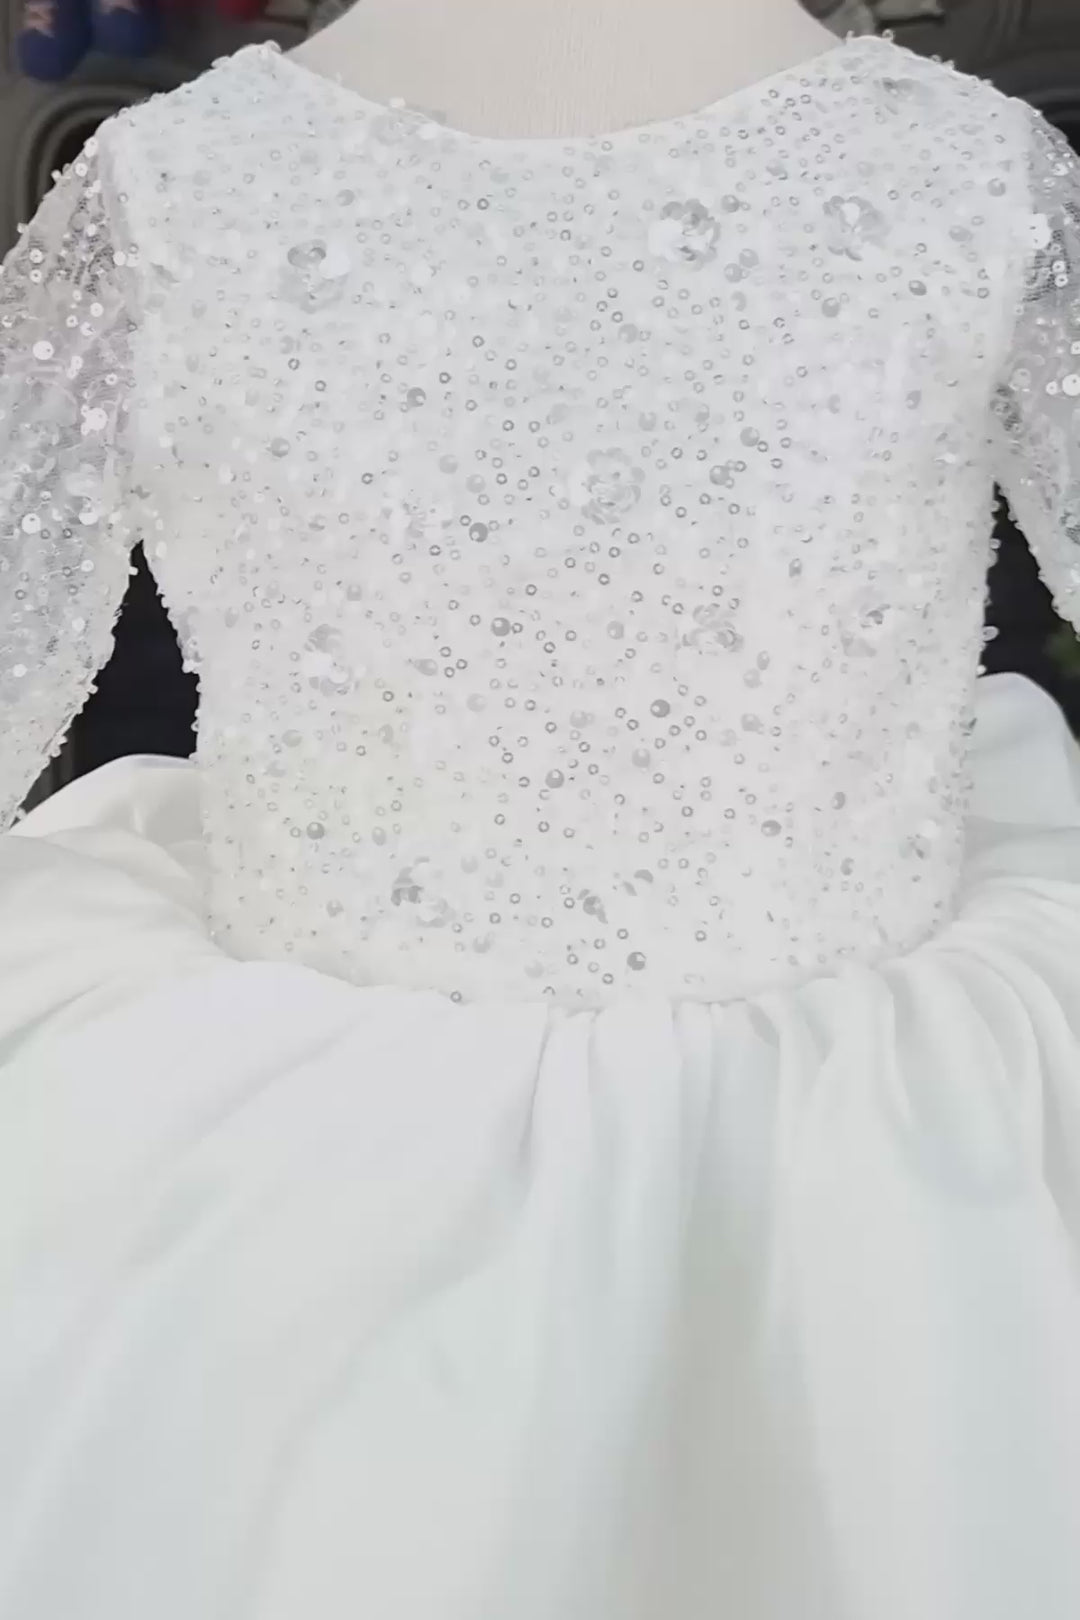 360° view of a white full sleeve bridesmaid dress that has white 3D sequins, bow, and knee length puffy skirt